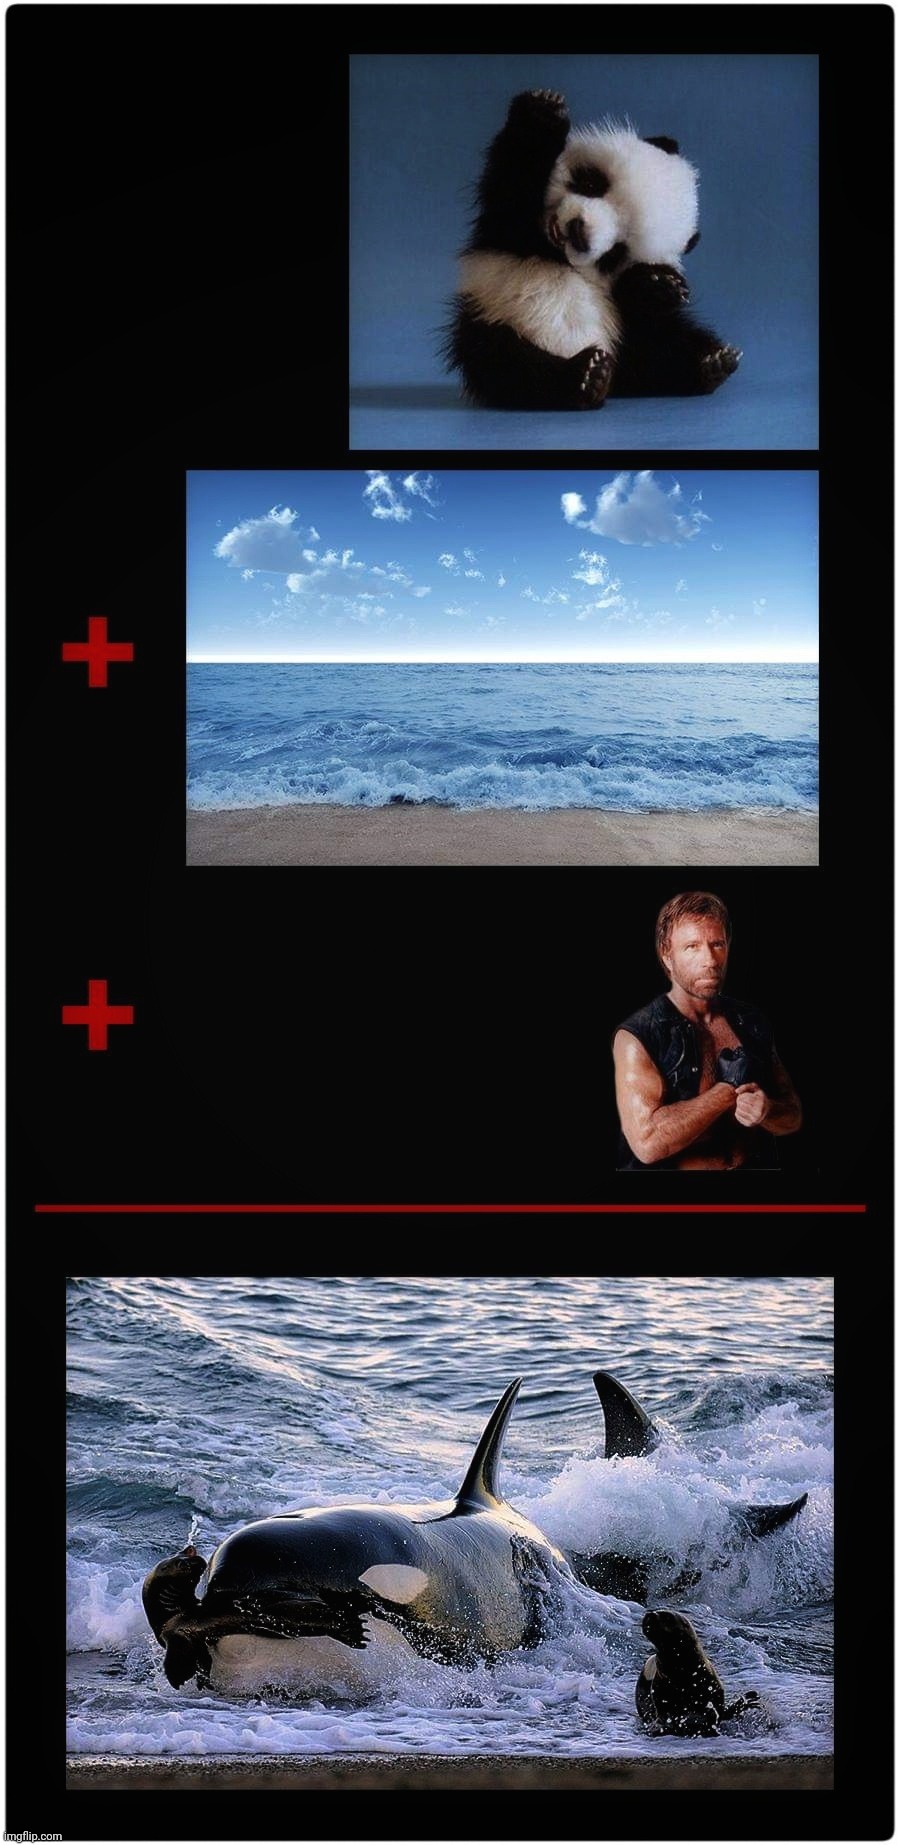 Norris of the Sea | image tagged in chuck norris,orca,killer whale | made w/ Imgflip meme maker